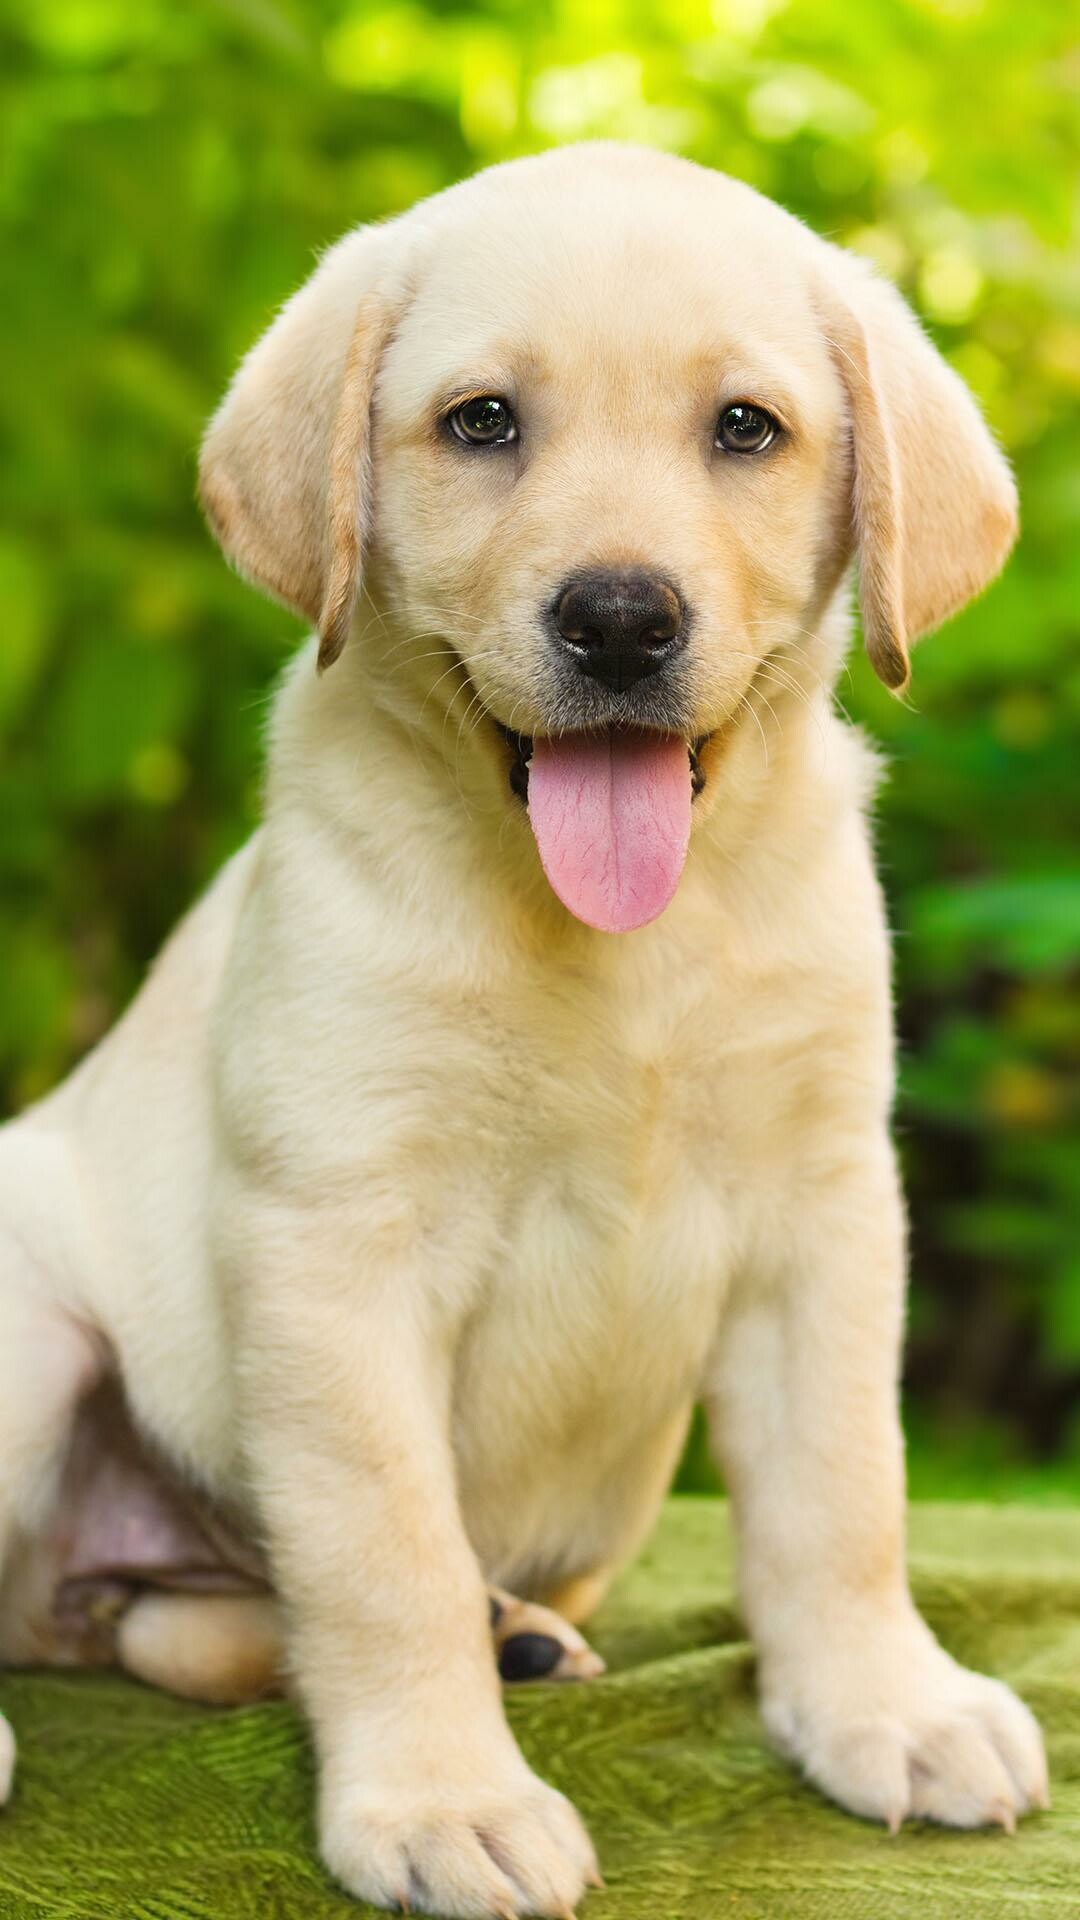 Labrador: With adequate exercise, these versatile companions can handle anything from a small city apartment to a vast ranch, Pet. 1080x1920 Full HD Wallpaper.